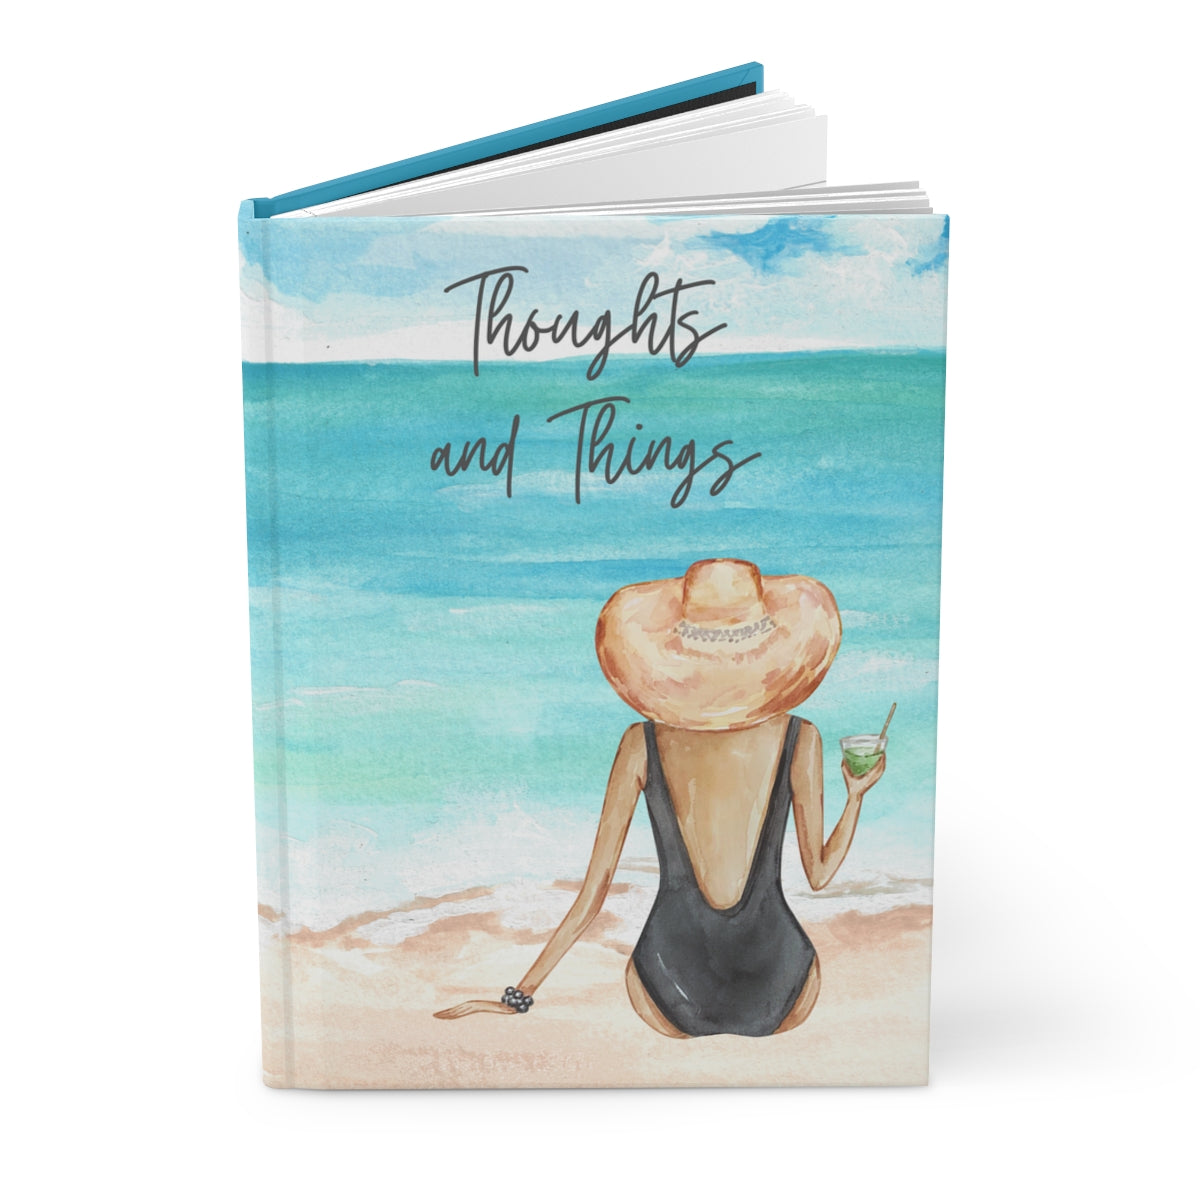 Hard cover notebook, Dotted Paper Journal, Beach Watercolor Journal, Thoughts & Things Journal, Lined Notebook, Lined Journal, Stationery - The Good Life Vibe